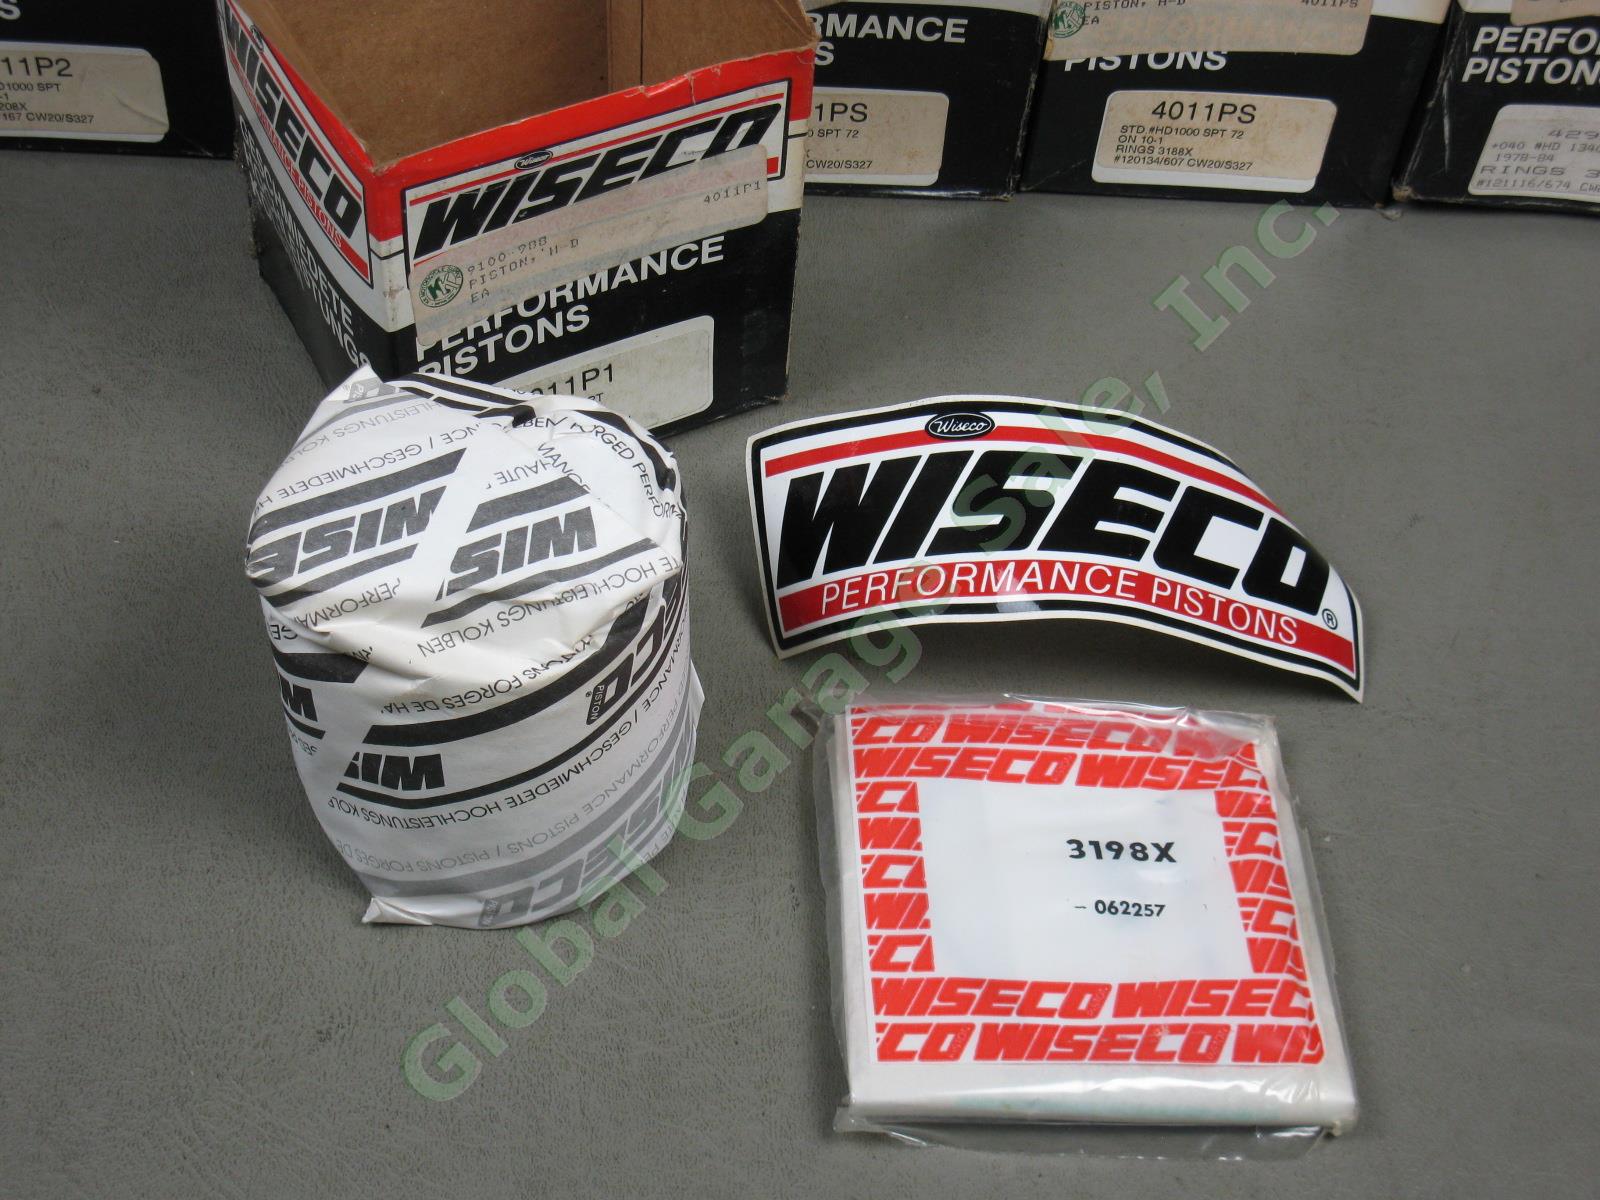 13 NOS Wiseco Harley Davidson Motorcycle Pistons Kit Lot 4011P2 4011P3 4011PS NR 7